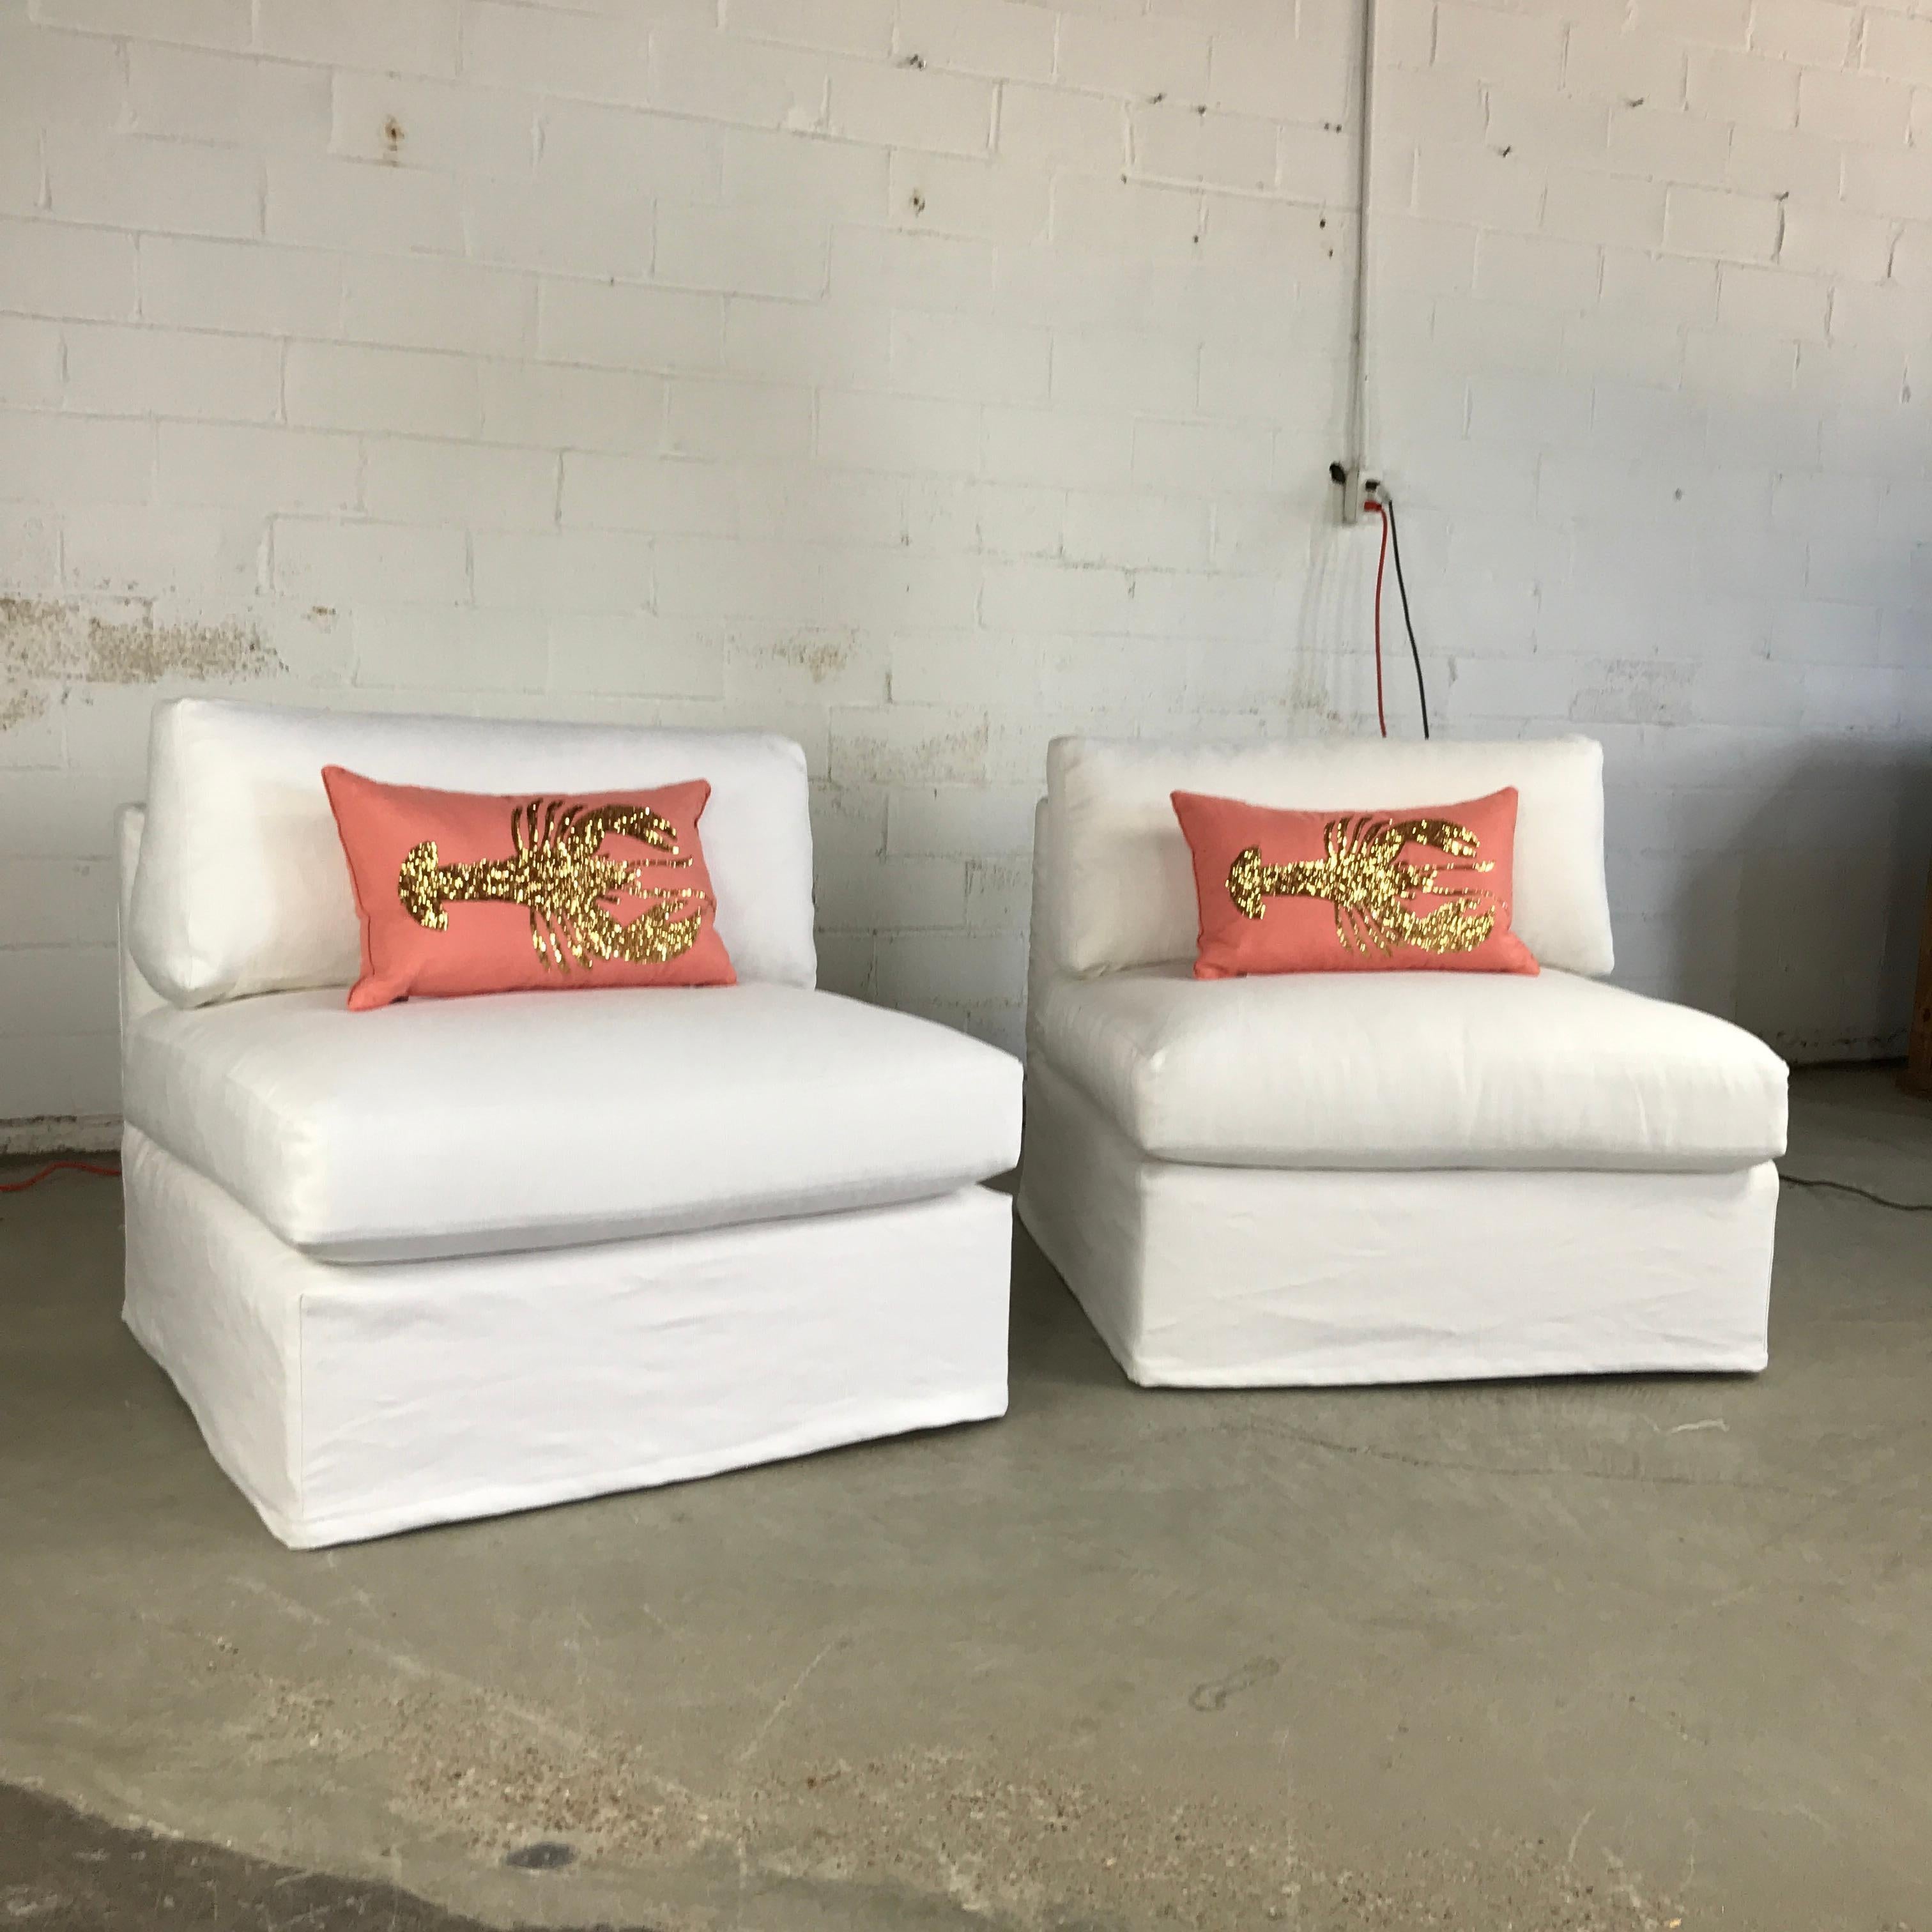 Pair of custom Milo Baughman style slipper chairs newly upholstered in Schumacher performance linen. Pillows not included. Chairs can be customized with COM for $6800.